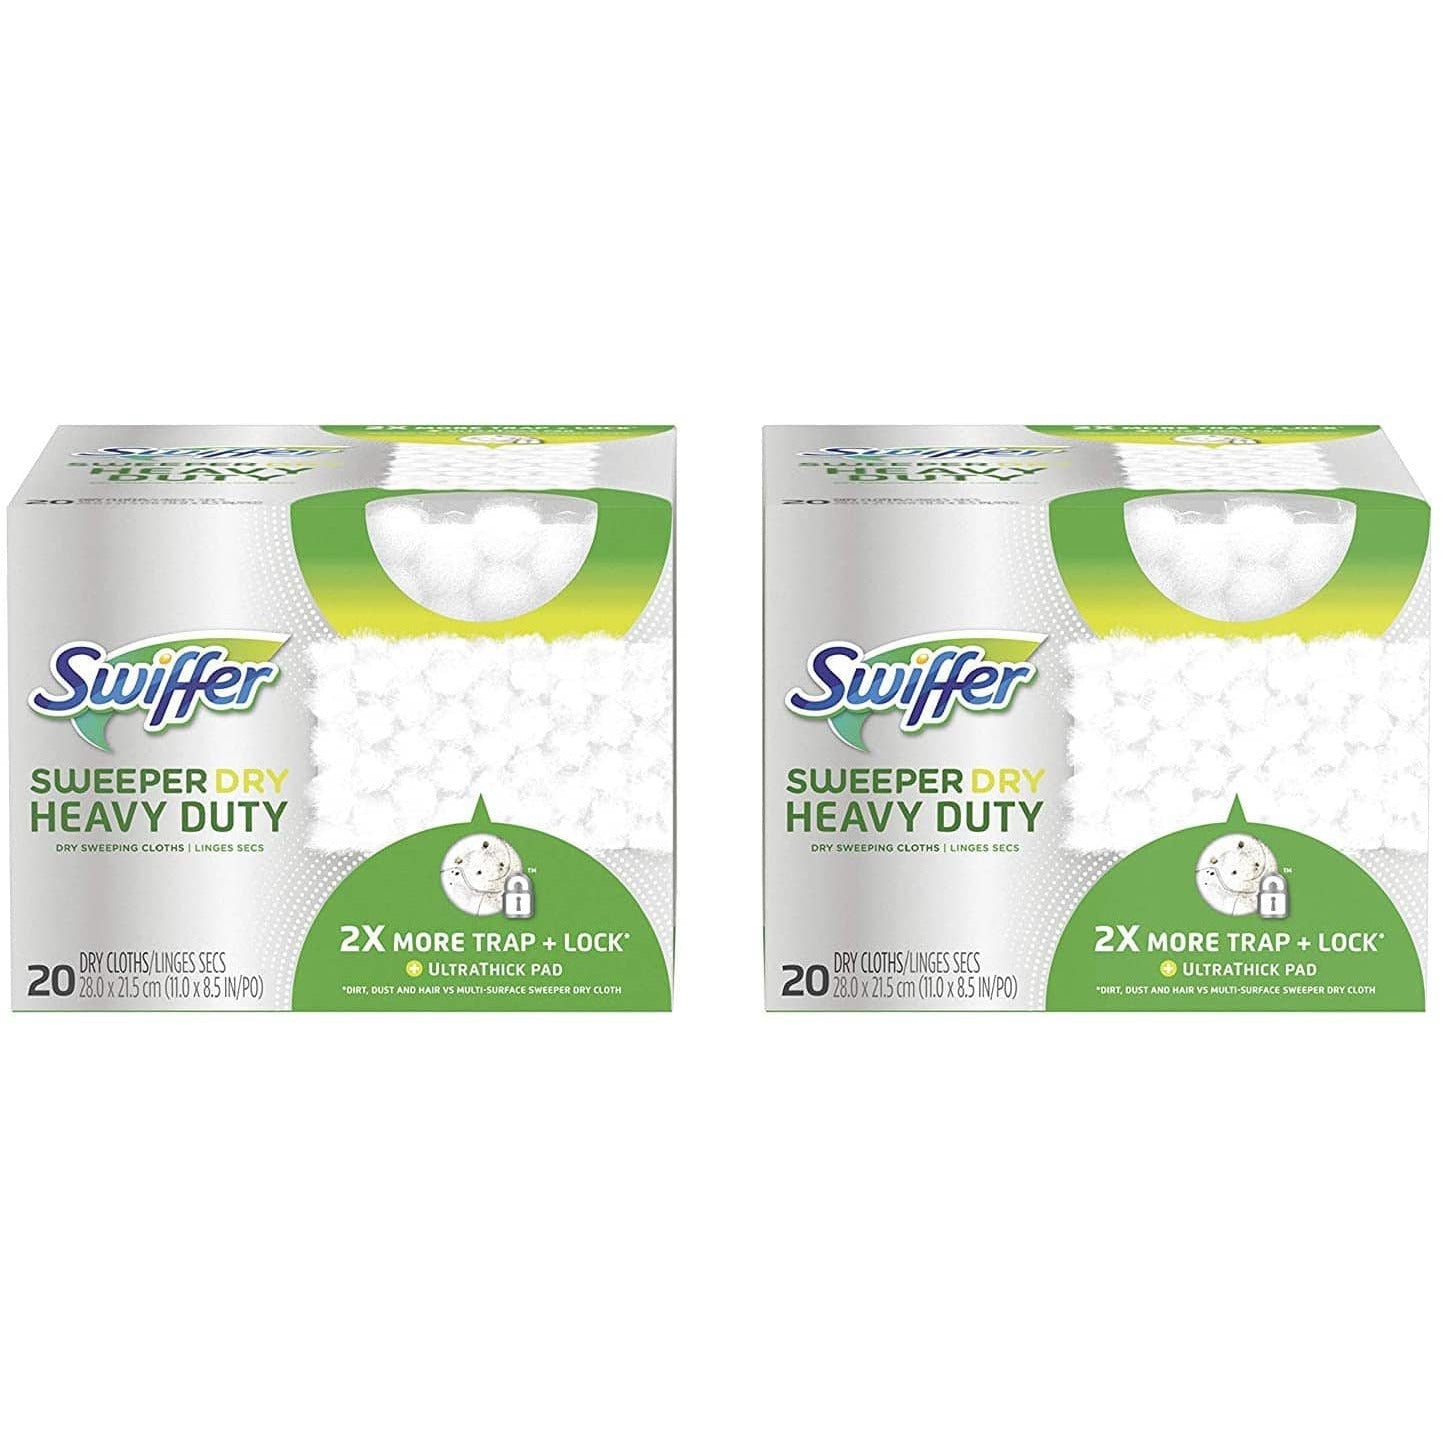 Swiffer Sweeper Heavy Duty Mop Pad Refills for Floor Mopping and Cleaning, 20 Count, 2 Pack